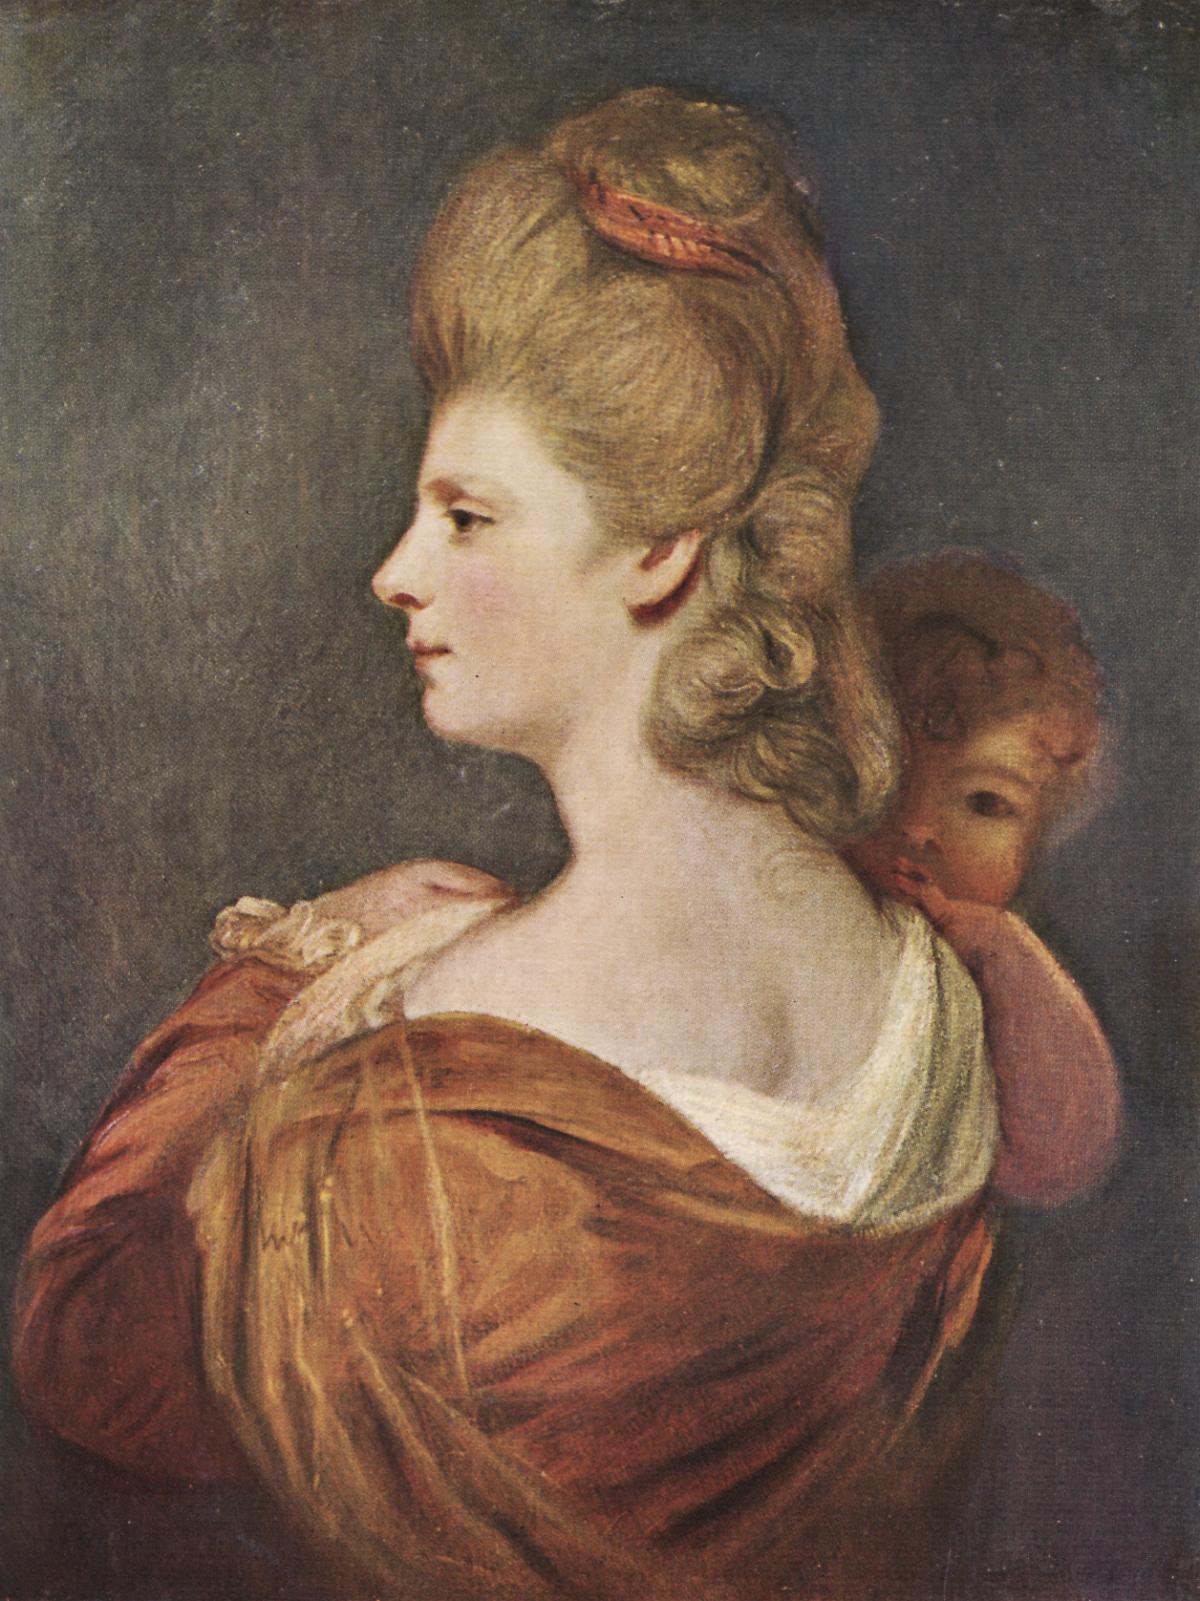 Lady and Child by Reynolds